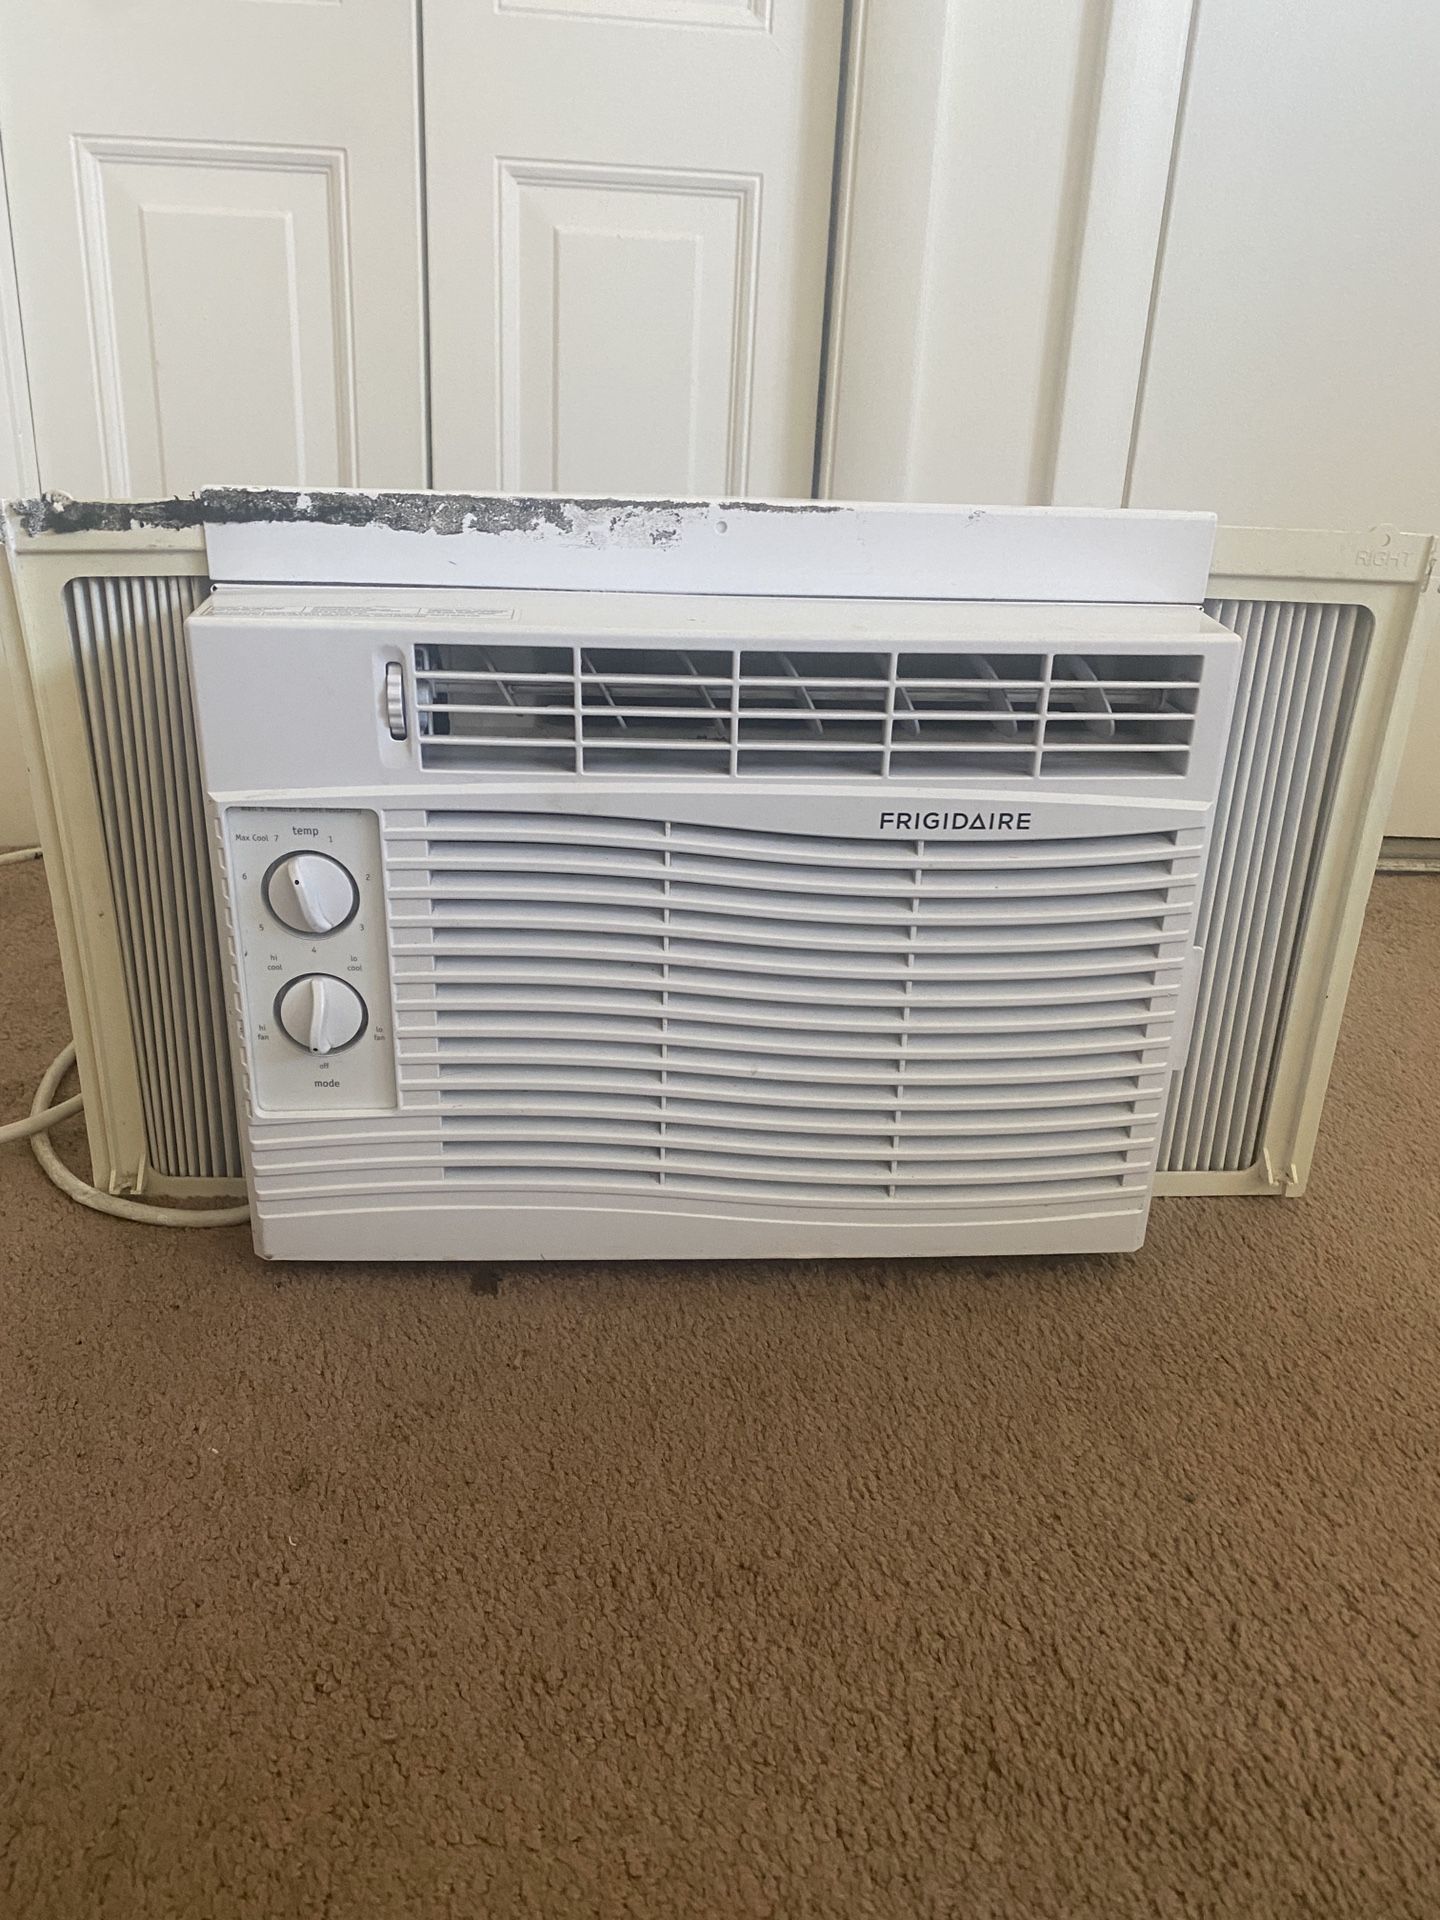 Window Mounted Air Conditioner 